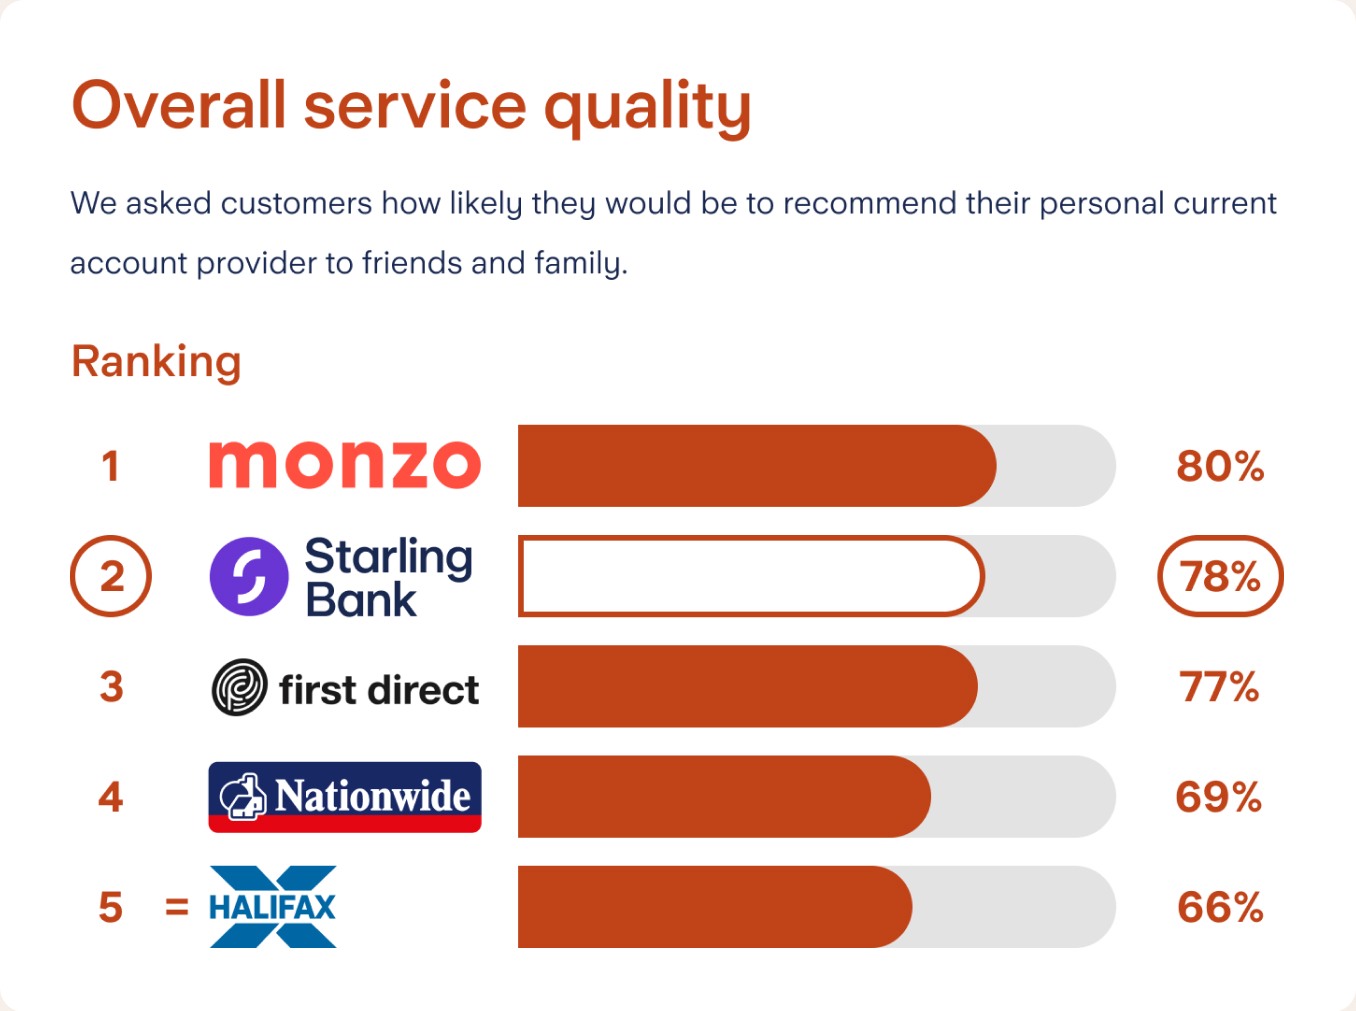 A graph showing independent service quality results. In first place is Monzo with 80%. In second place is Starling Bank with 78%. In third is First Direct with 77%, fourth is Nationwide with 69%, and fifth is Halifax with 66%.